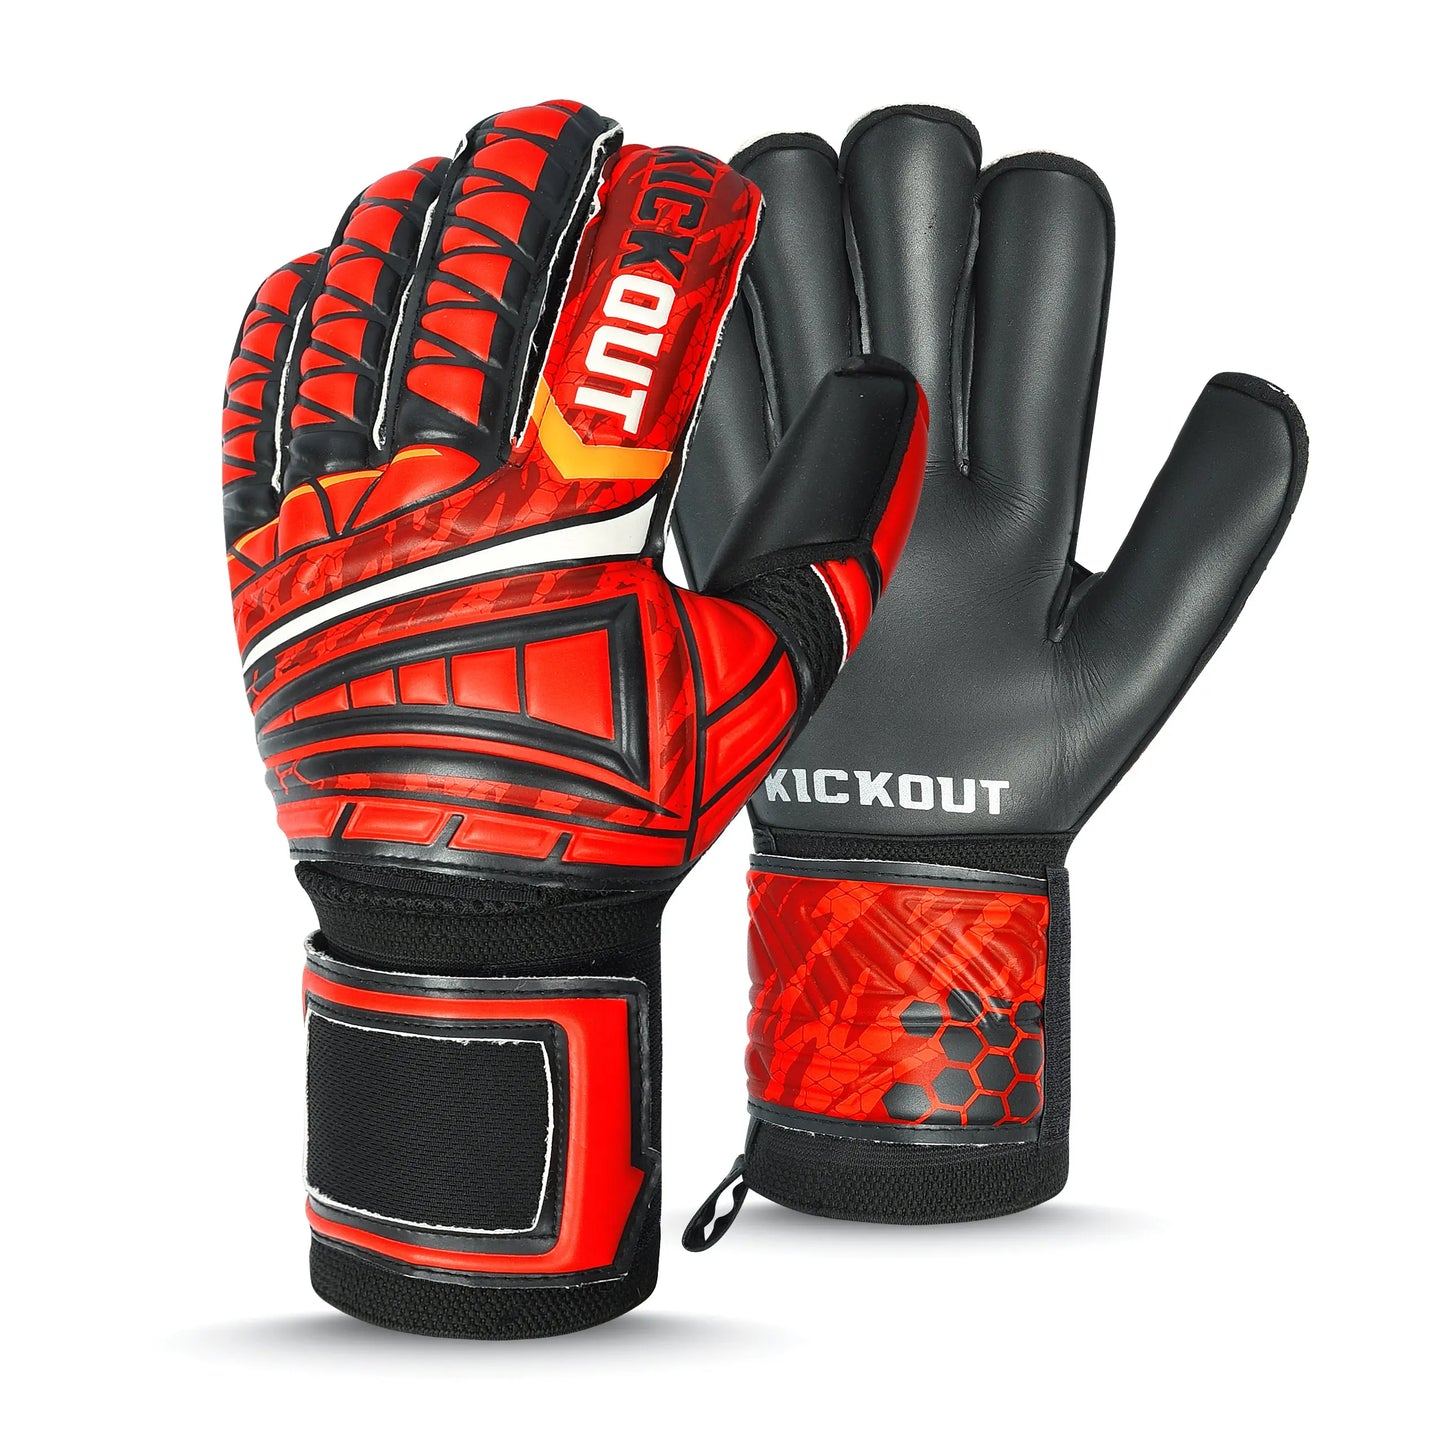 Kickout Red Rage Goal Keeper Glove with Finger Saves Kickout